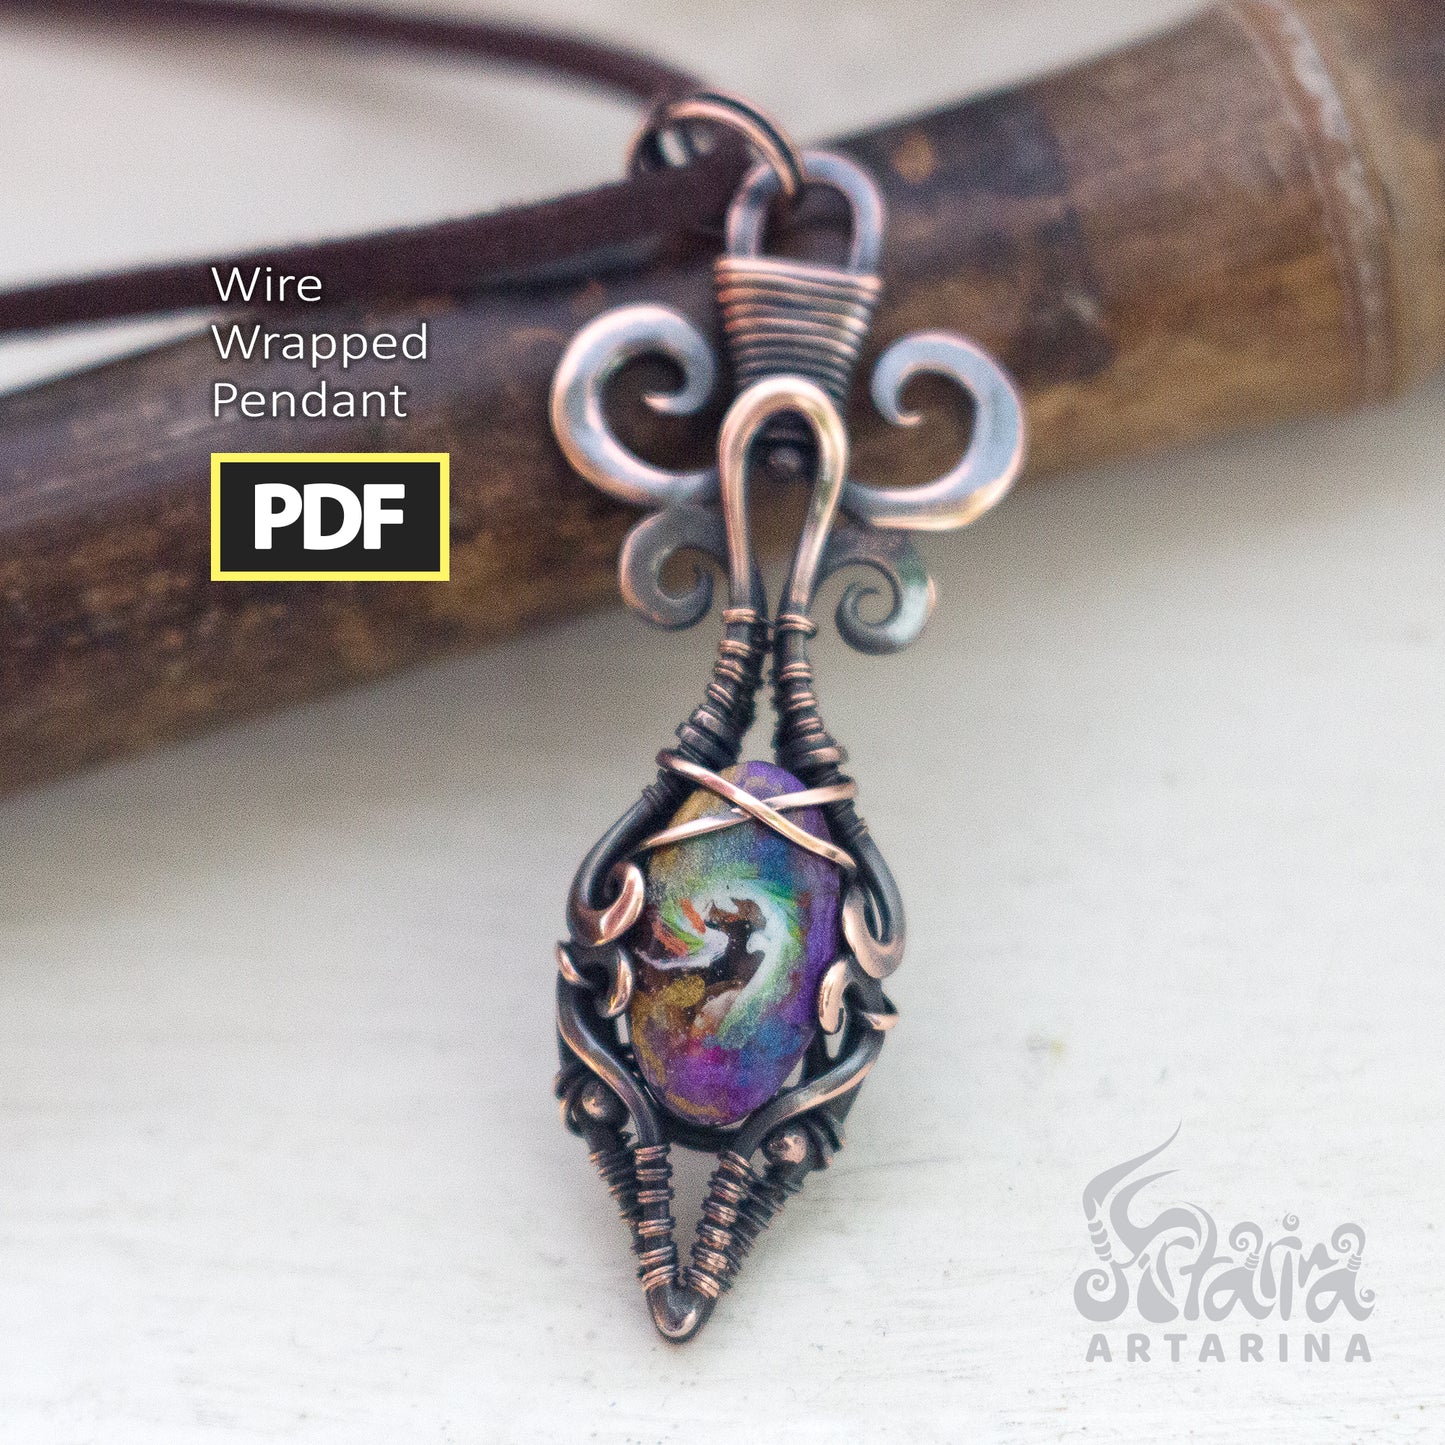 Wire wrapping beautiful necklace PDF tutorial for beginners and advanced wire wrappers | See DESCRIPTION BELOW